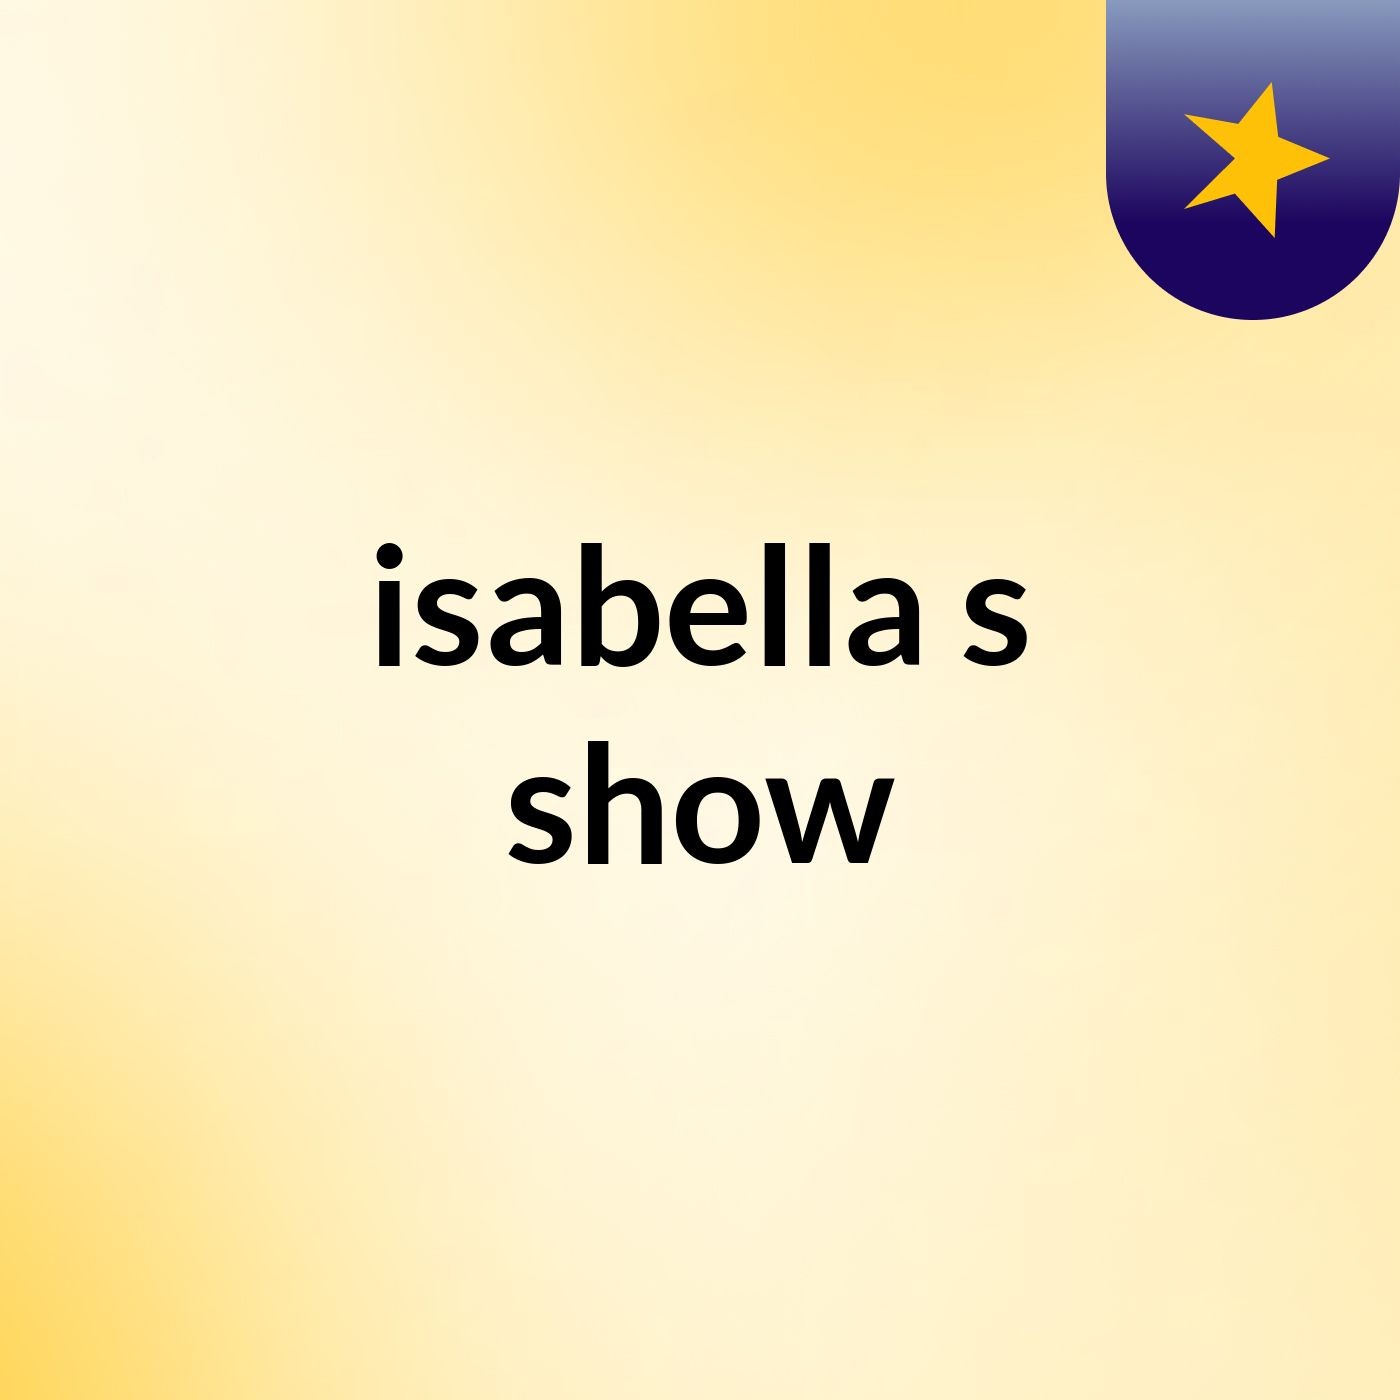 isabella's show